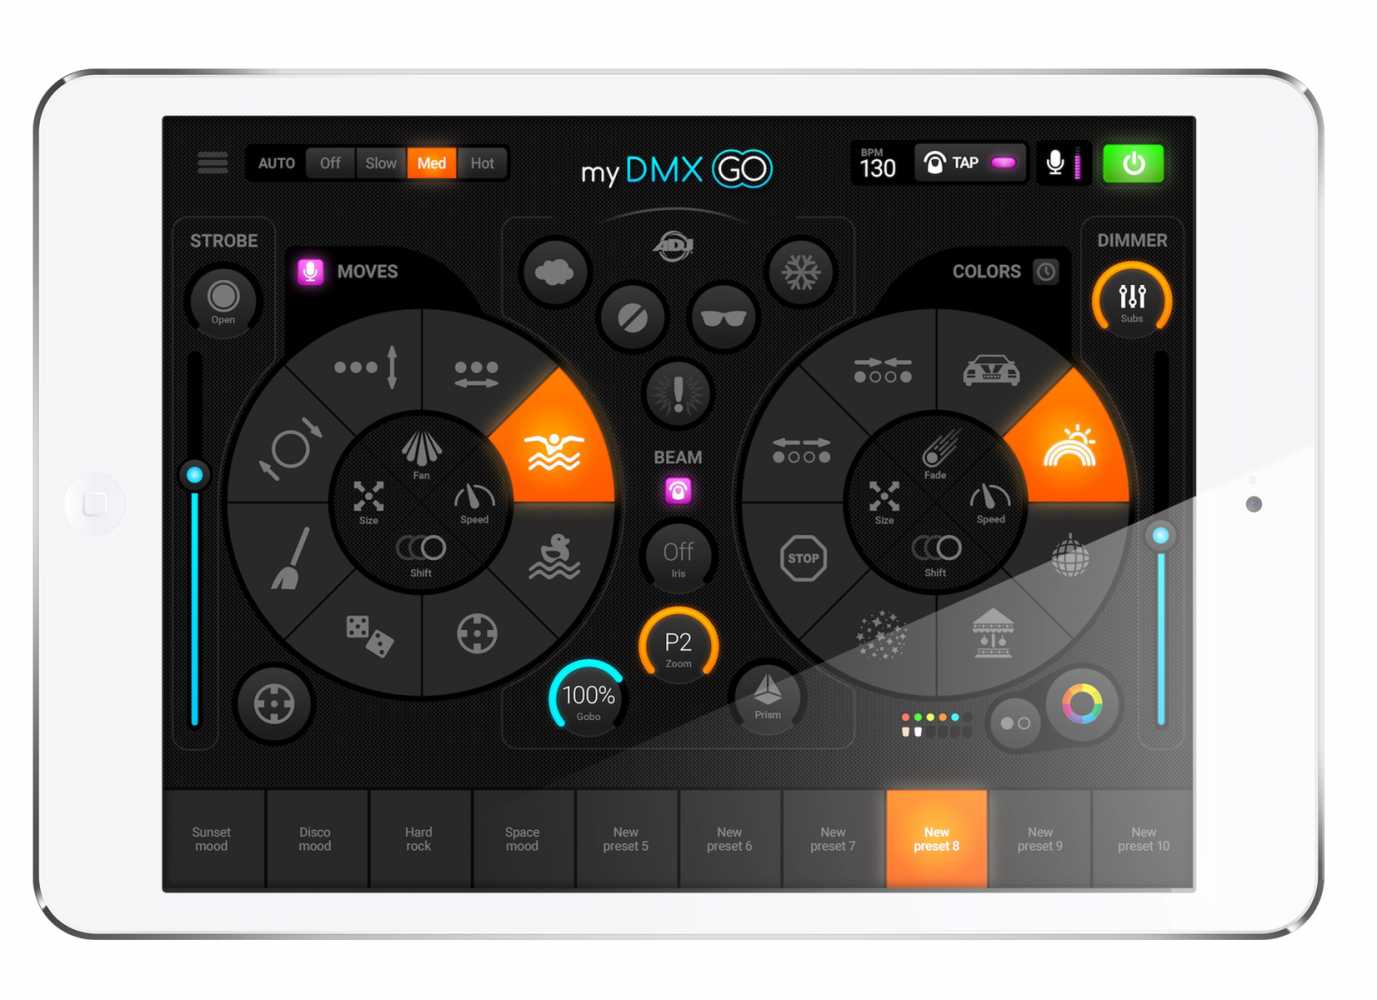 The mydmx GO app for Apple, Android and Amazon Fire tablets is available now